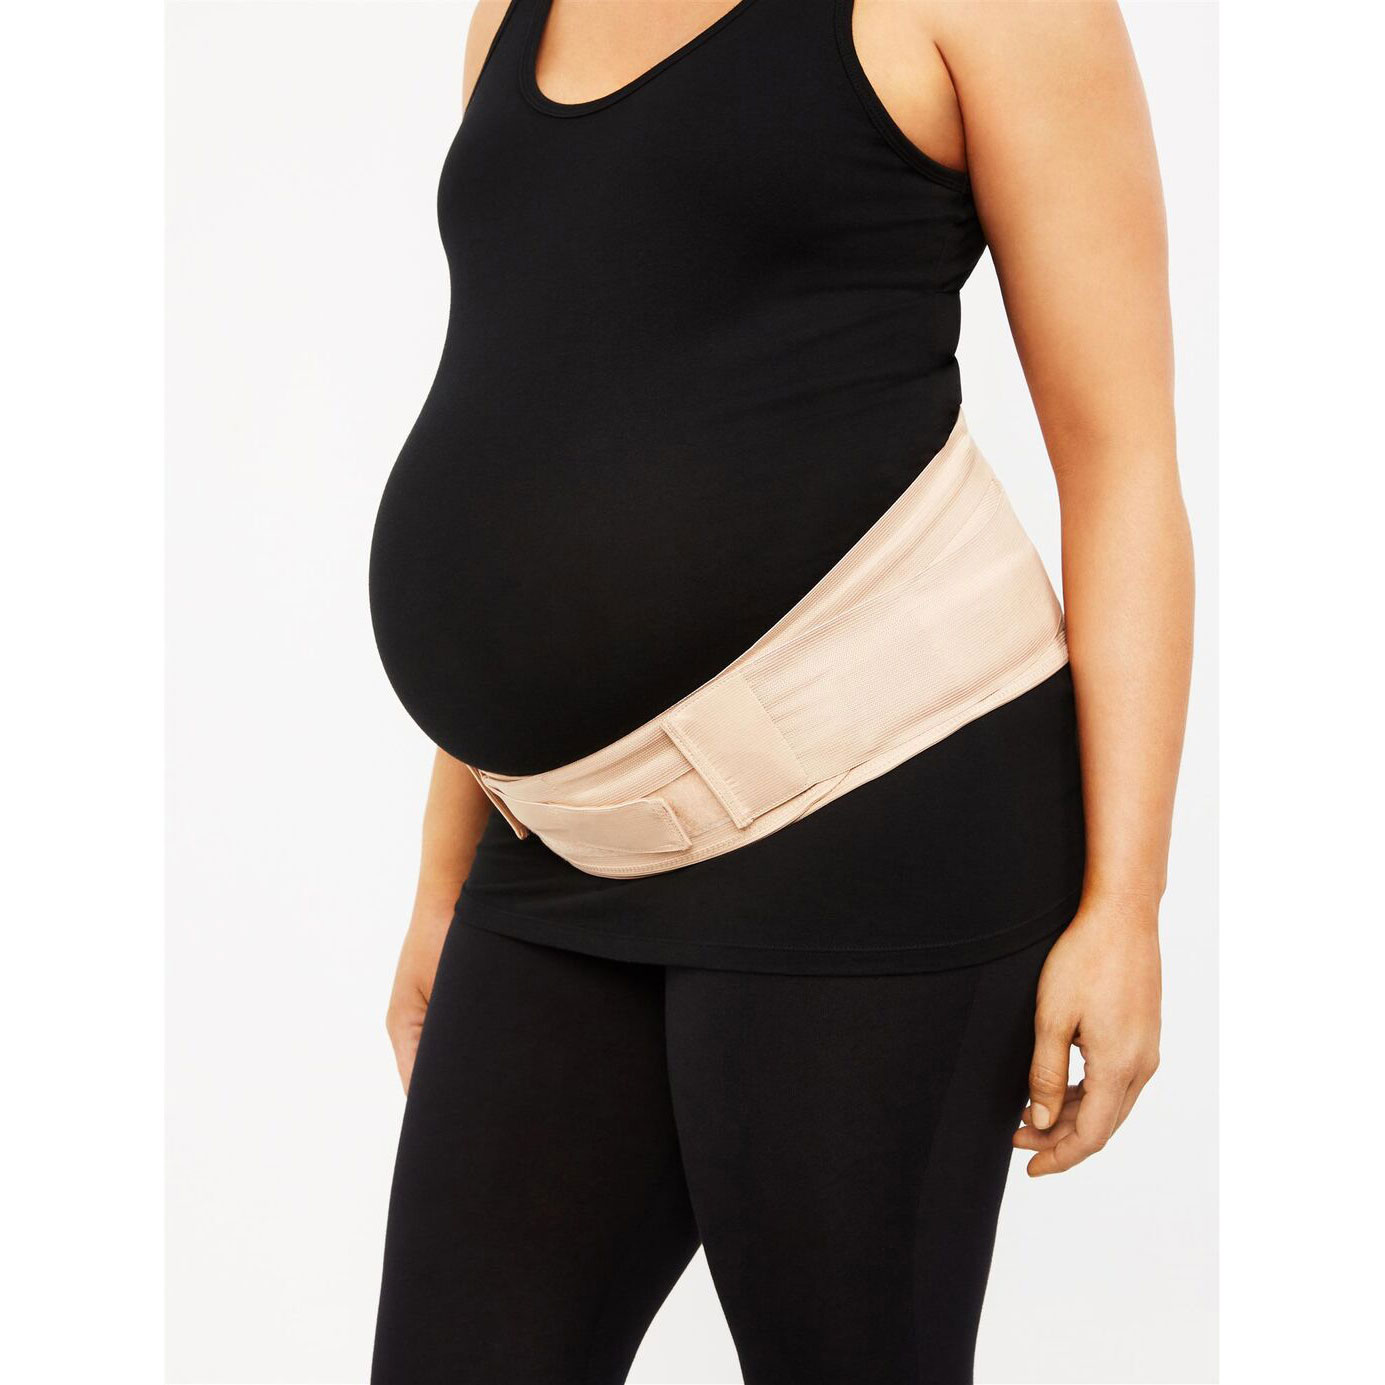 Plus Size The Ultimate Maternity Belt